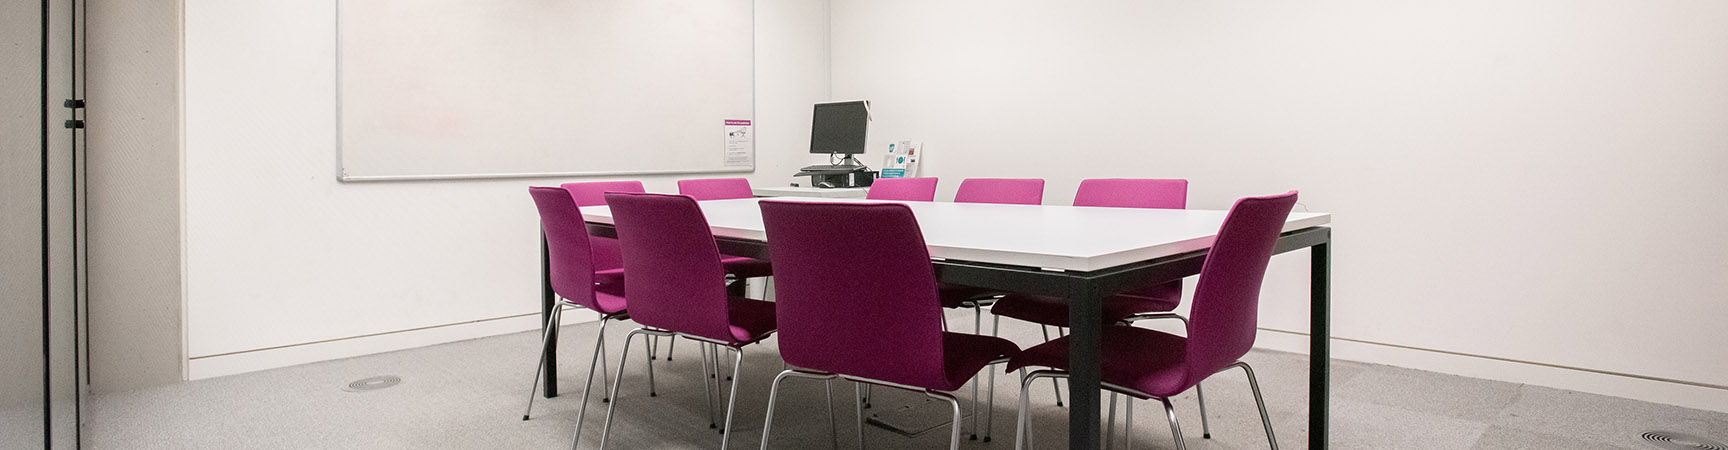 Nine purple chairs surrounding a white desk in a room